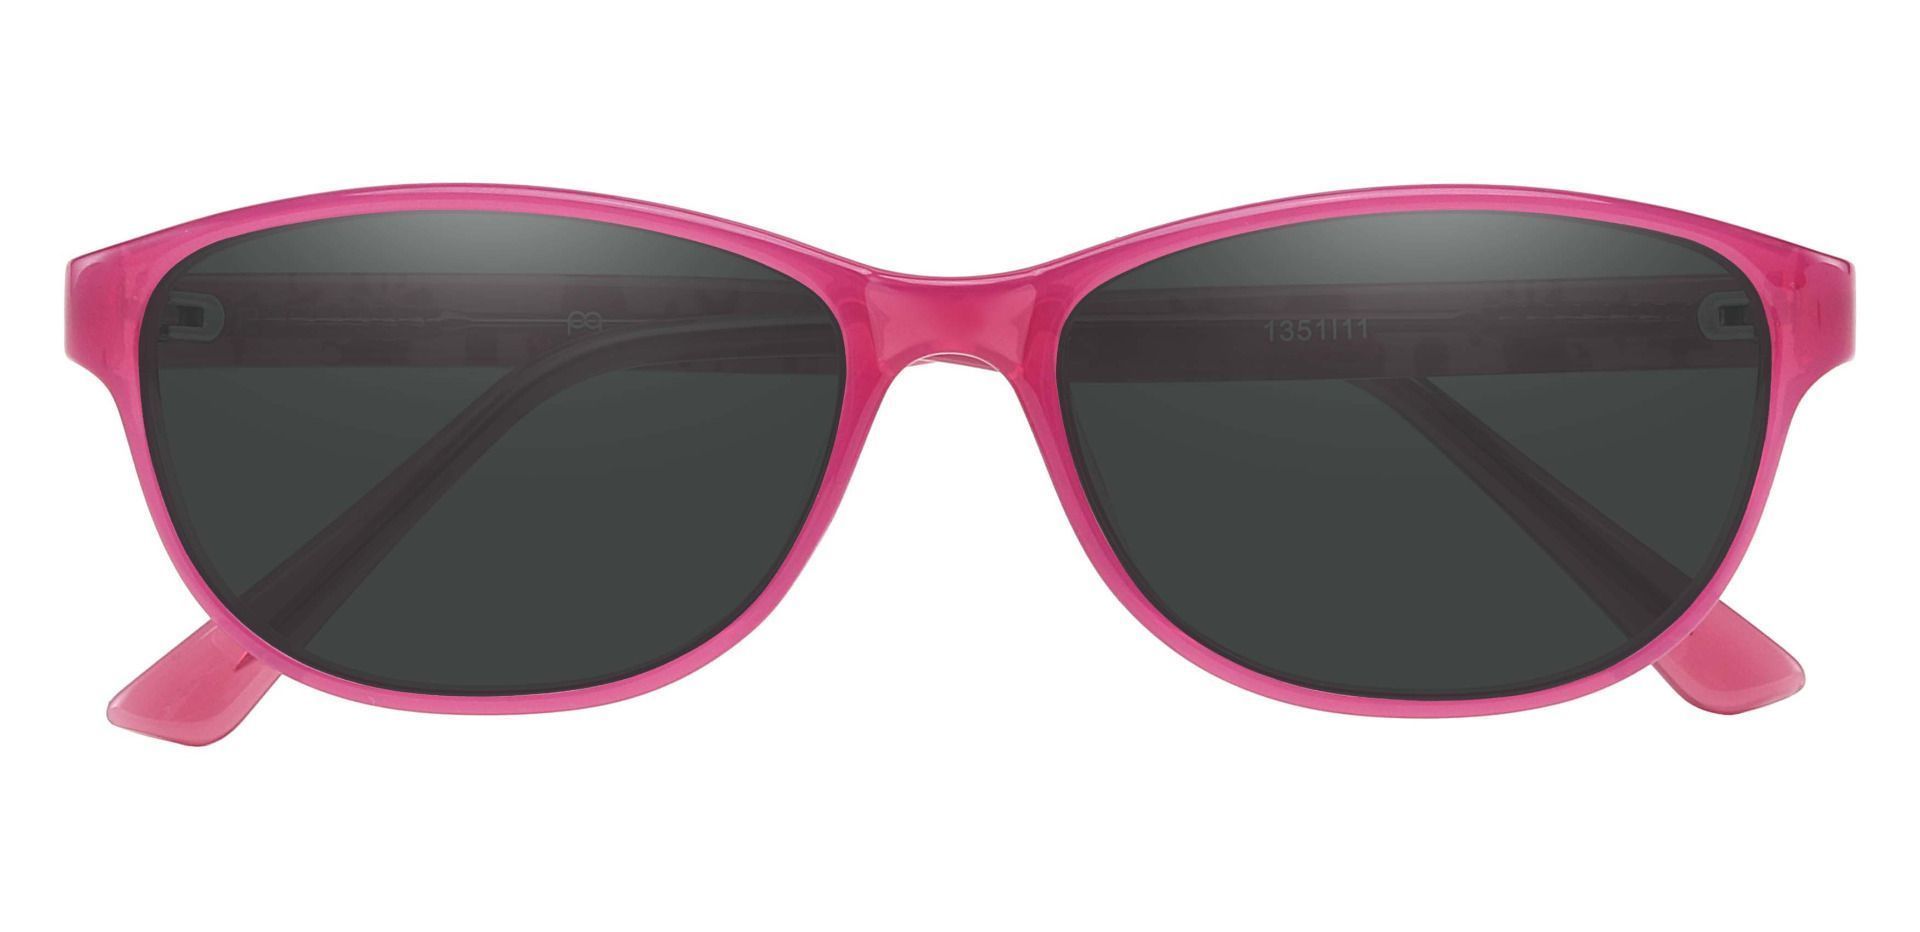 Patsy Oval Lined Bifocal Sunglasses - Pink Frame With Gray Lenses